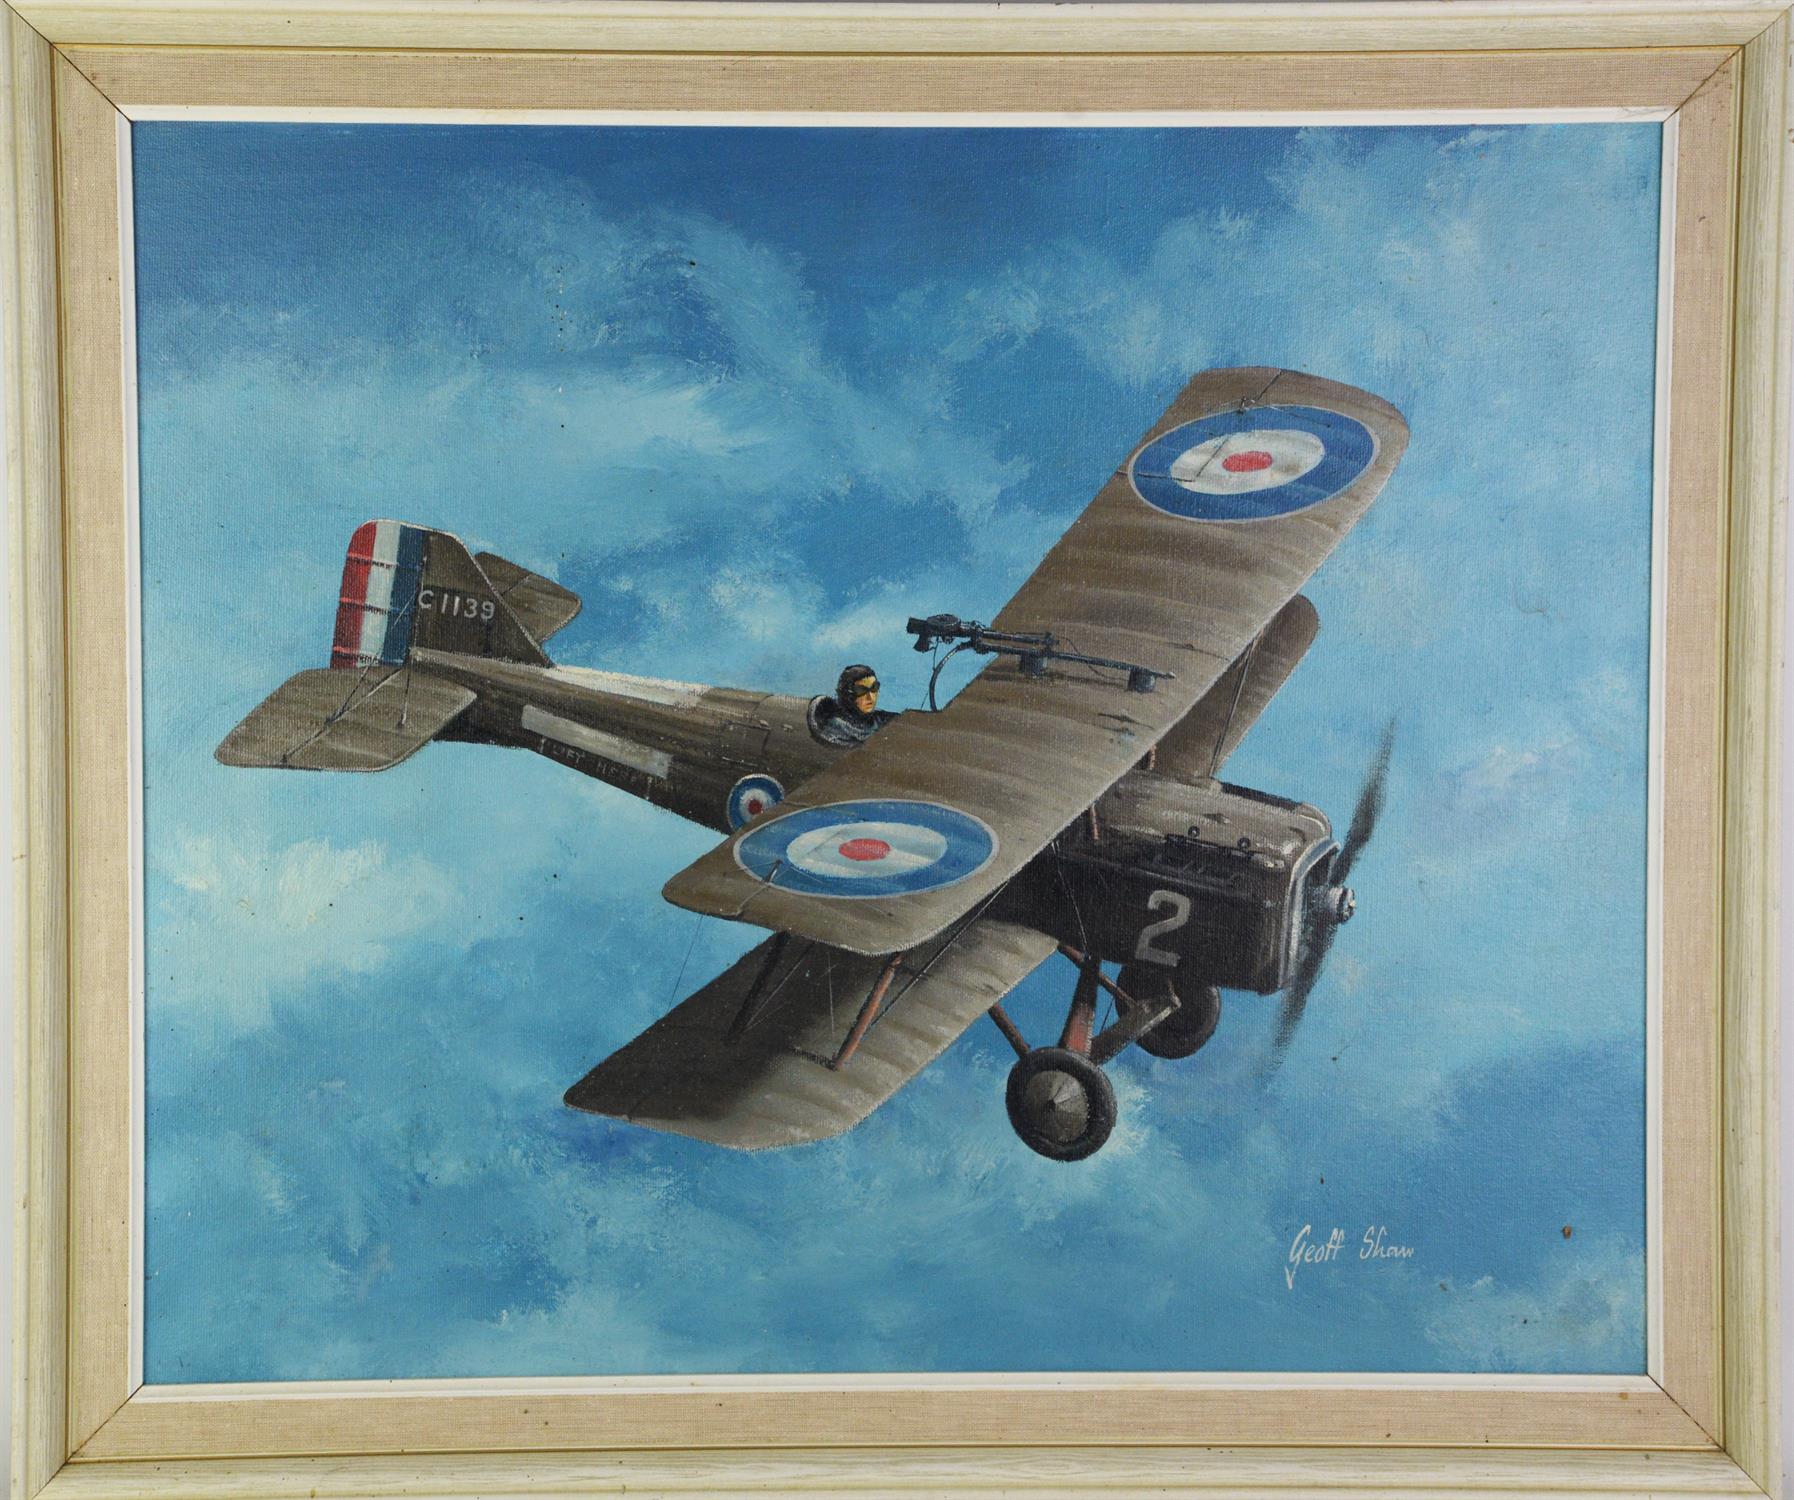 Geoff Shaw, SE 5A, flown by Capt K.L. Caldweklkl, 72 Squadron, oil on board, signed and dated 1977,